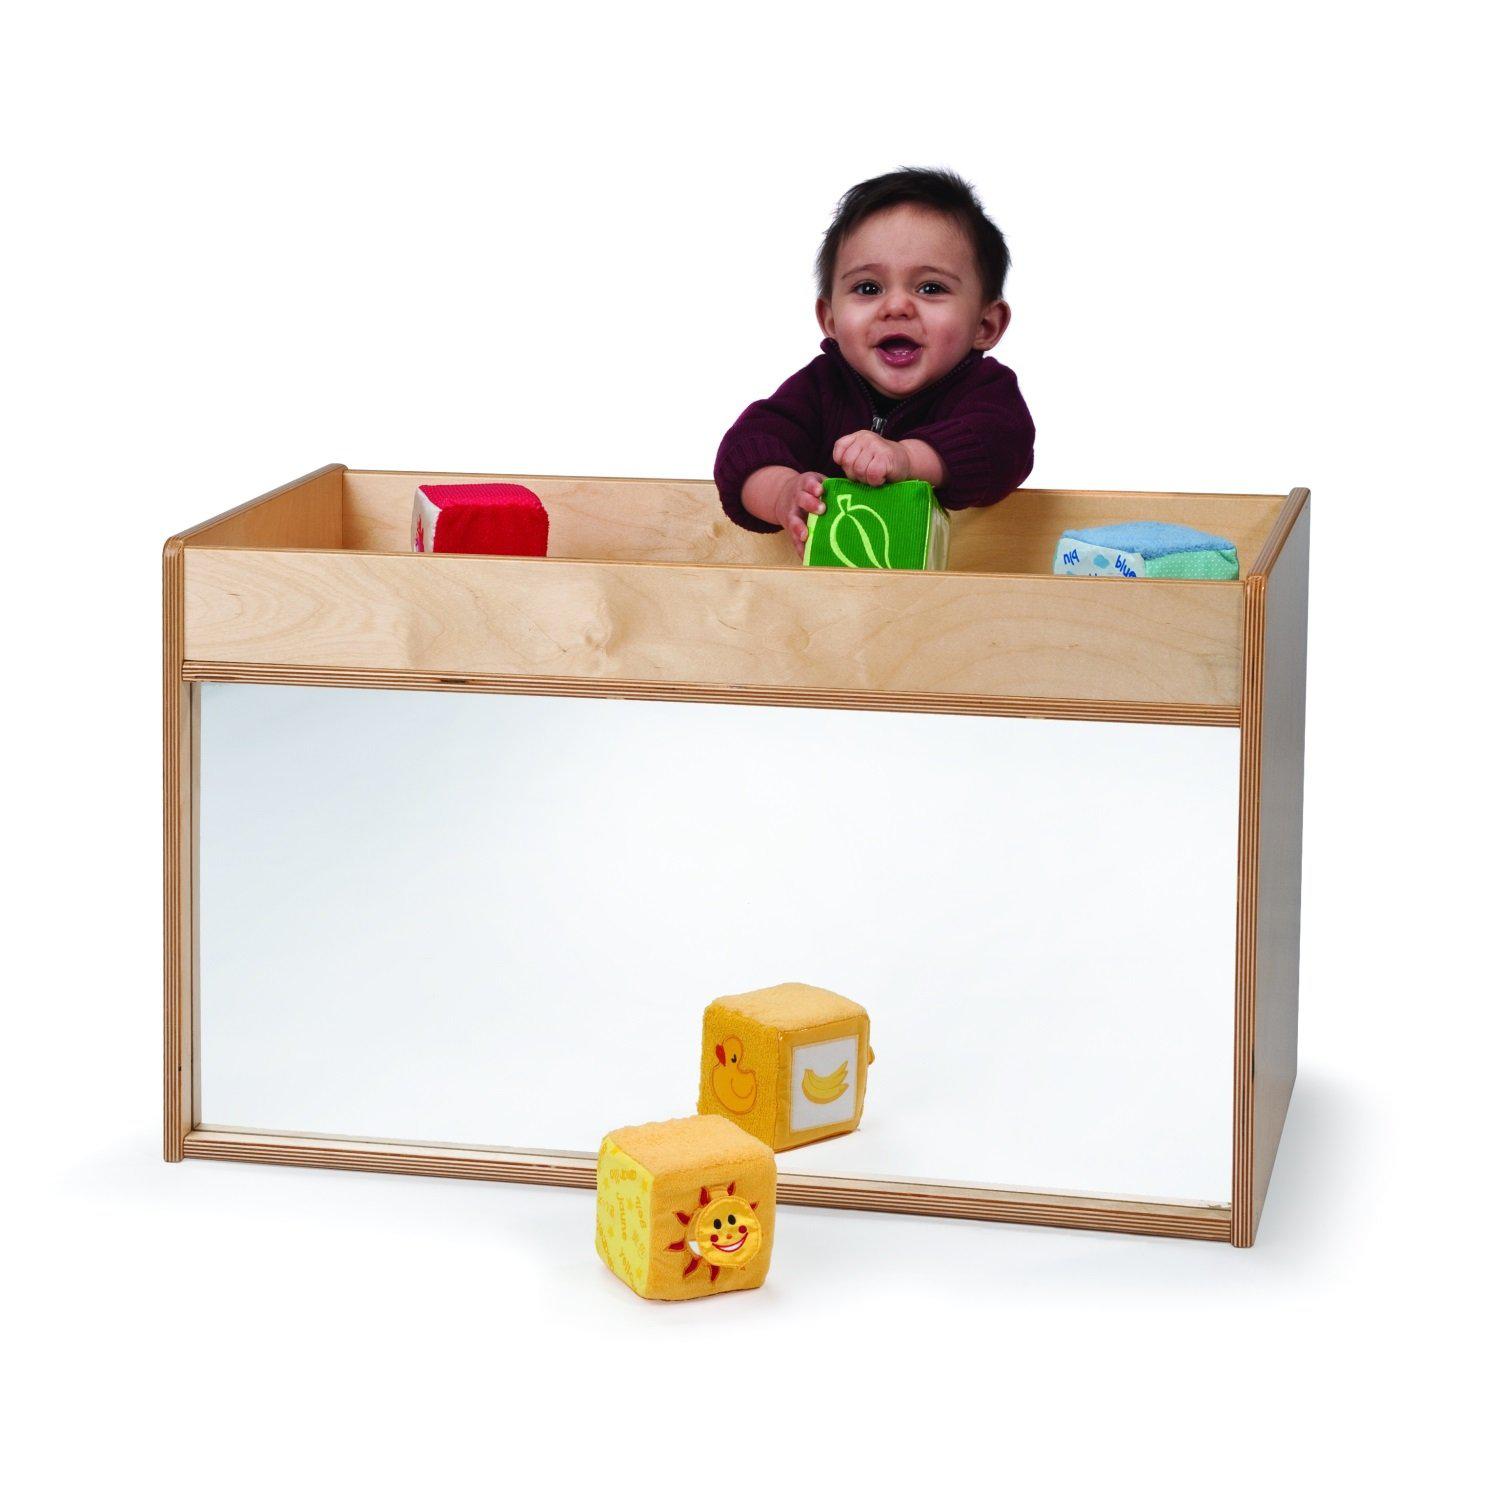 I-See-Me Toddler Mirror Cabinet